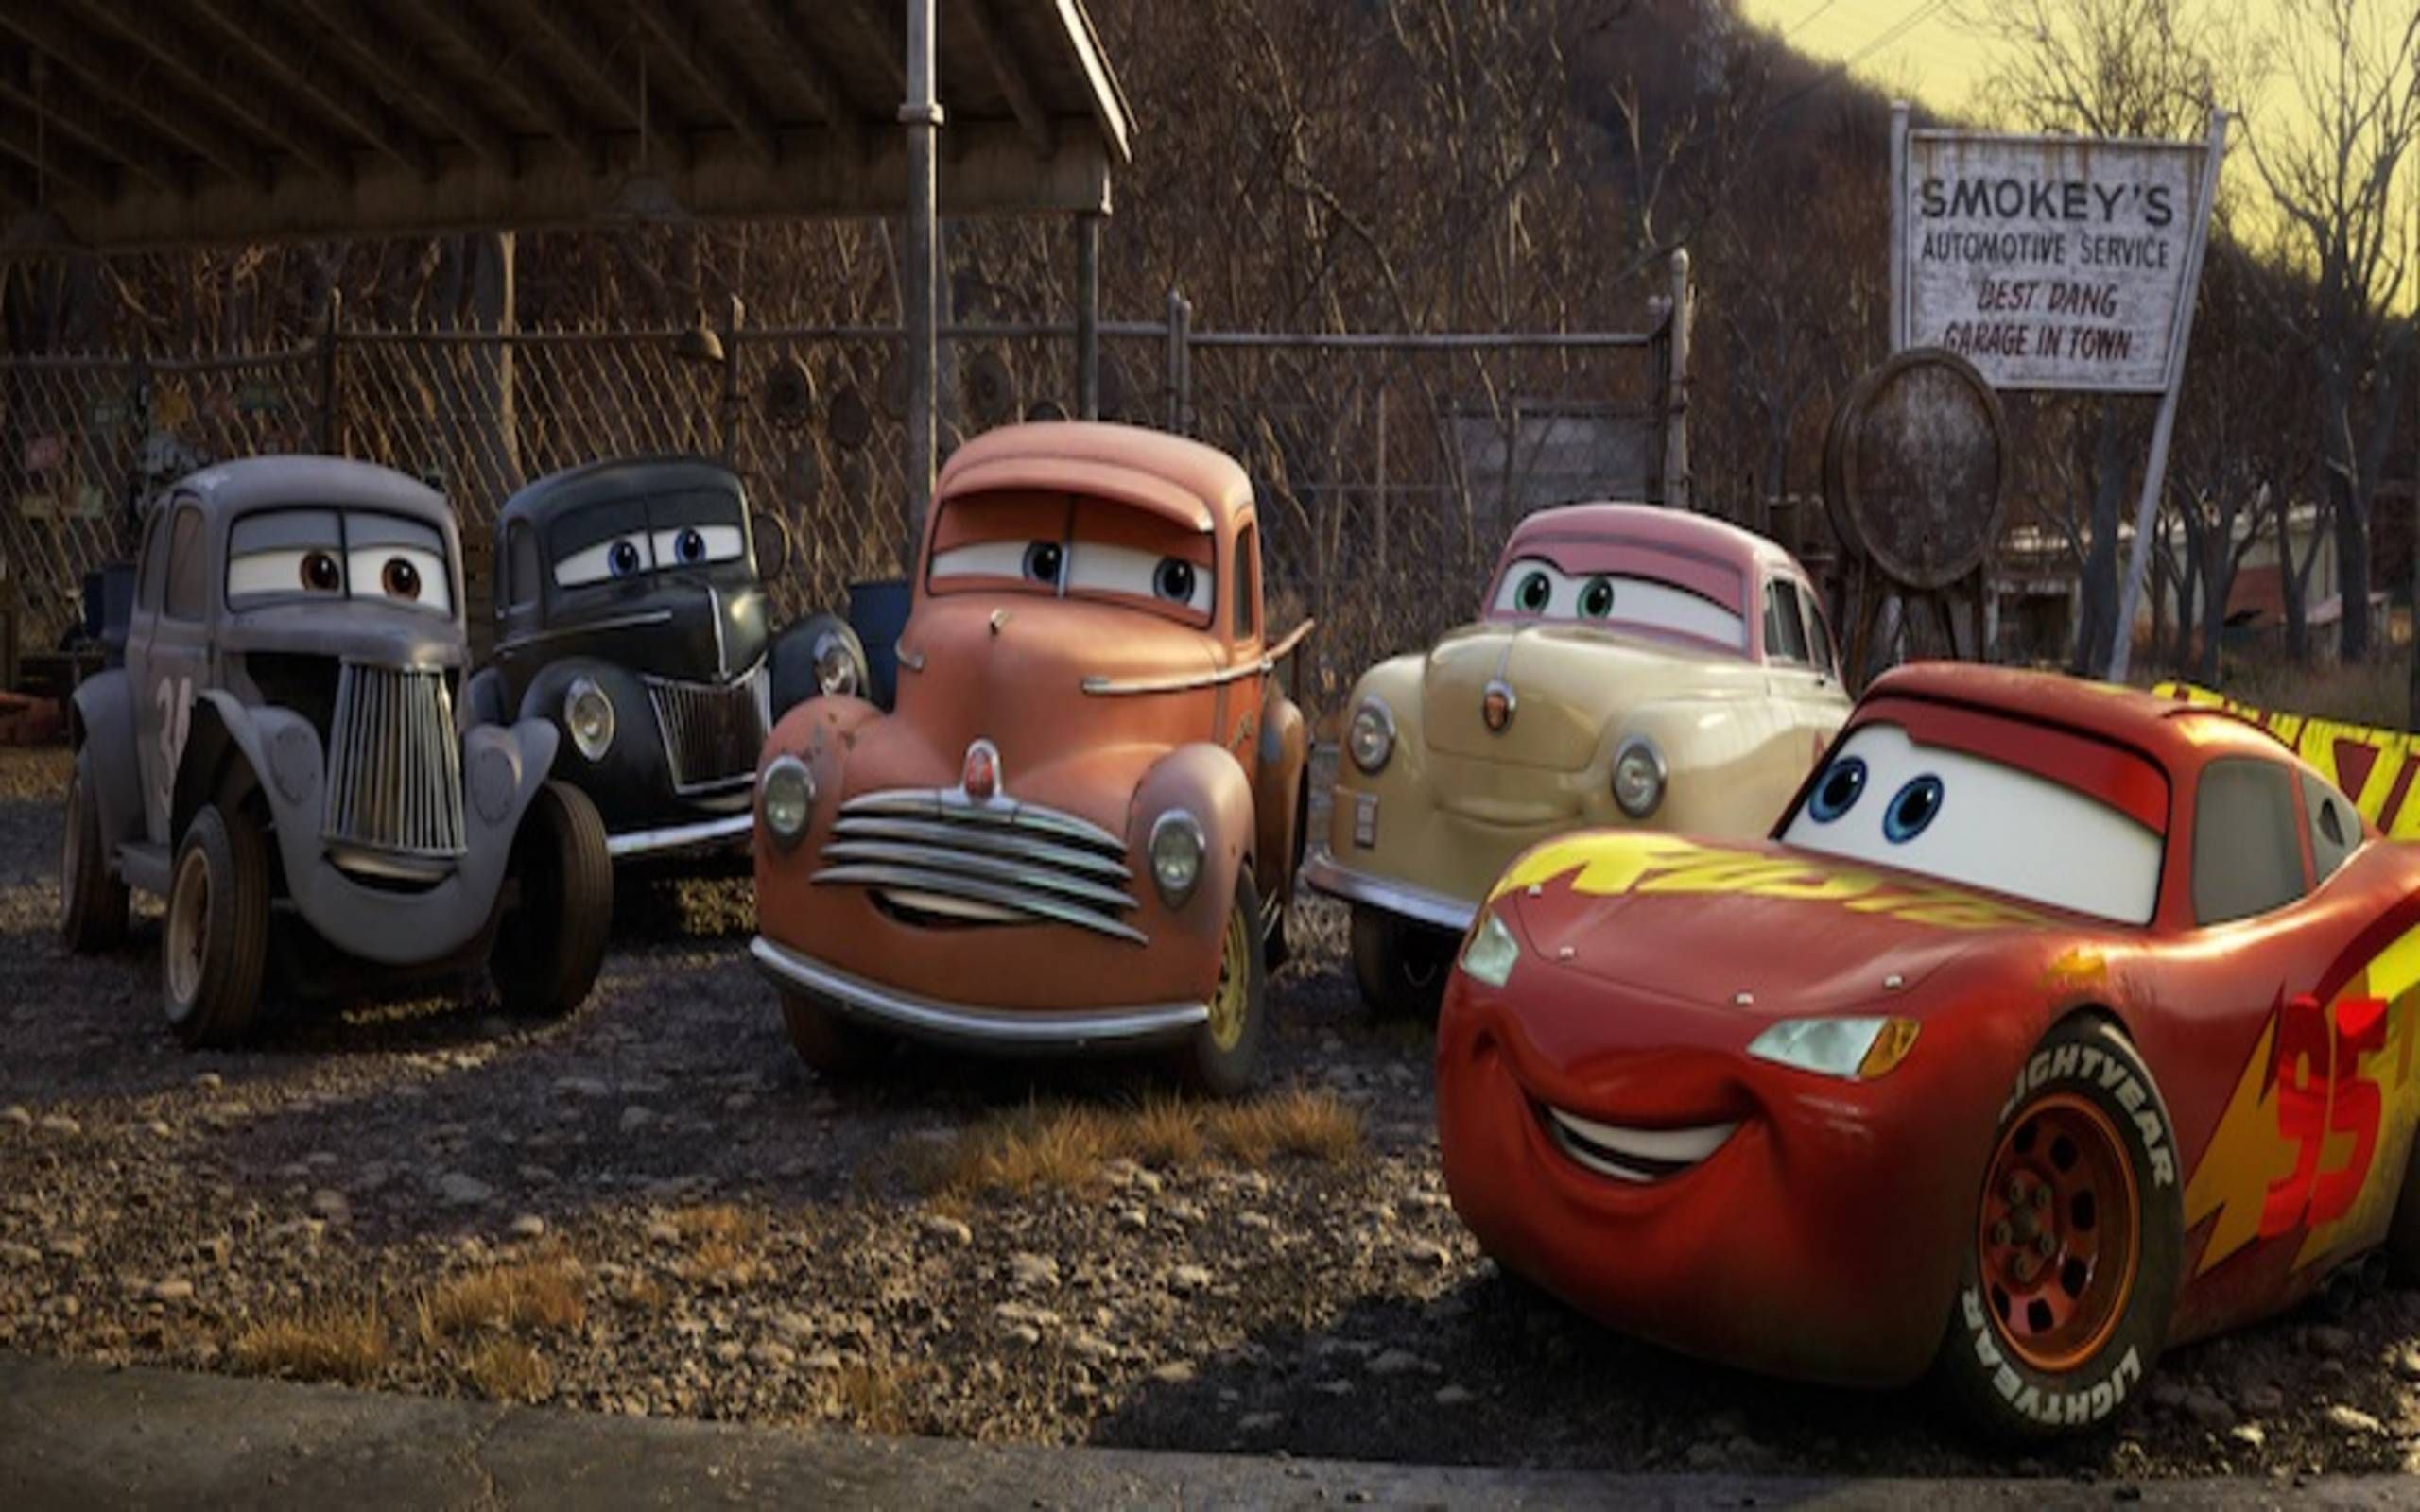 Cars 3' characters based on real-life NASCAR legends